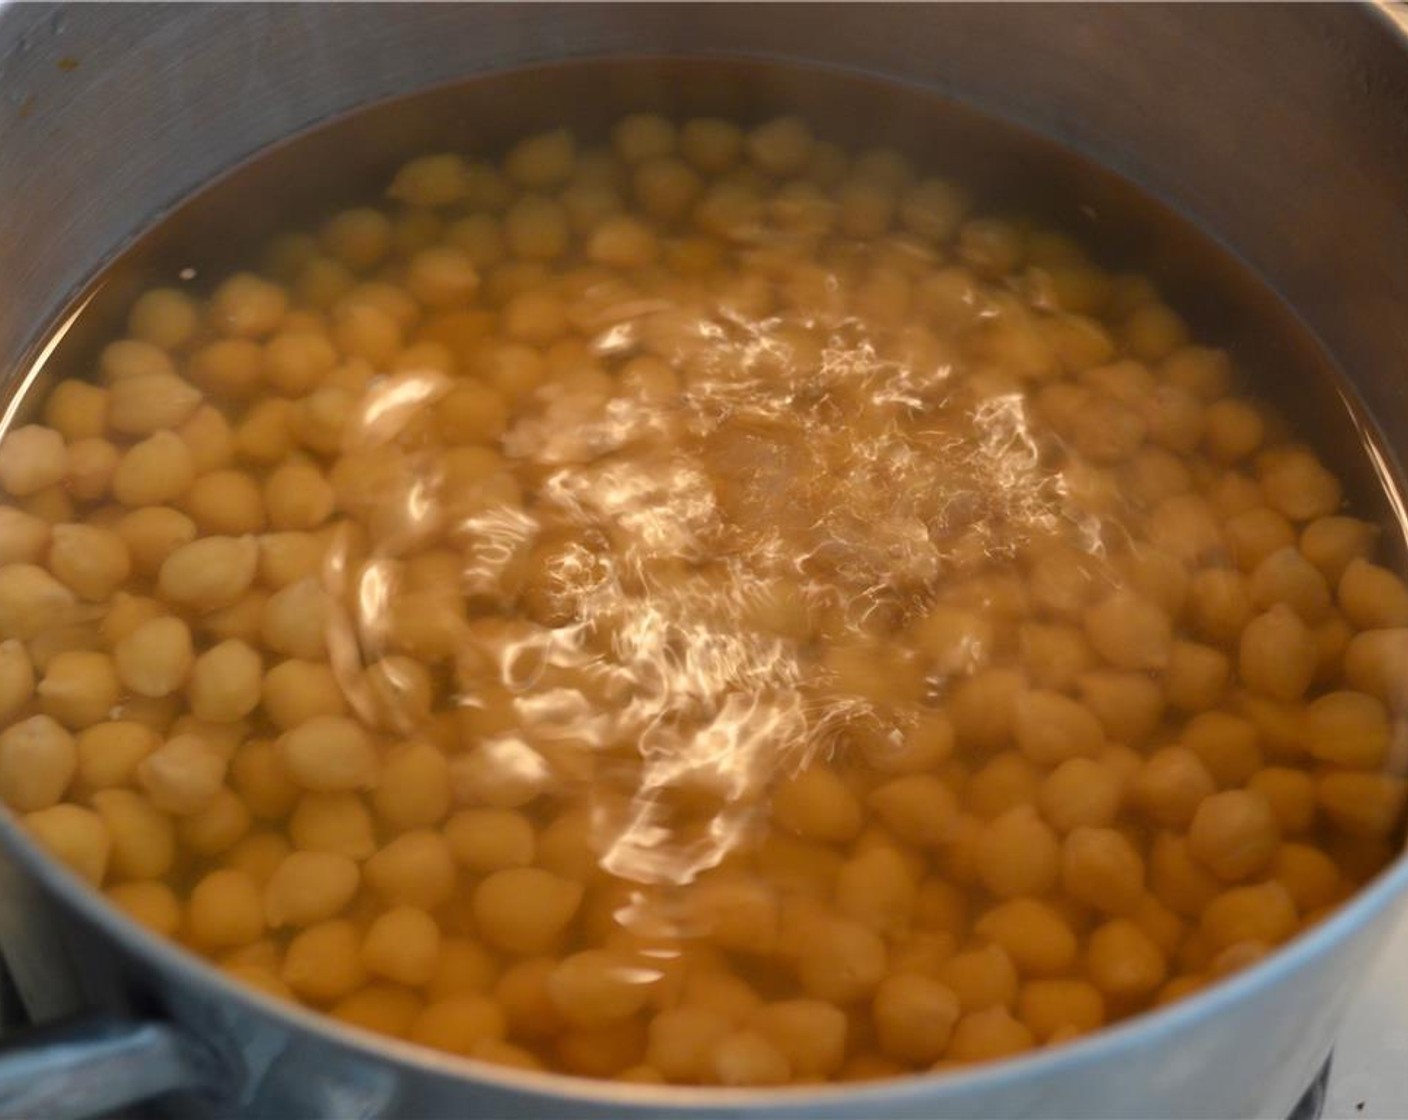 step 1 Start by getting the pre-soaked Dried Chickpeas (2 1/4 cups) simmering in a large pot of water. Ideally, you should use the cooking liquid to cook them. Make sure the lid stays on. Continue to simmer until very soft.